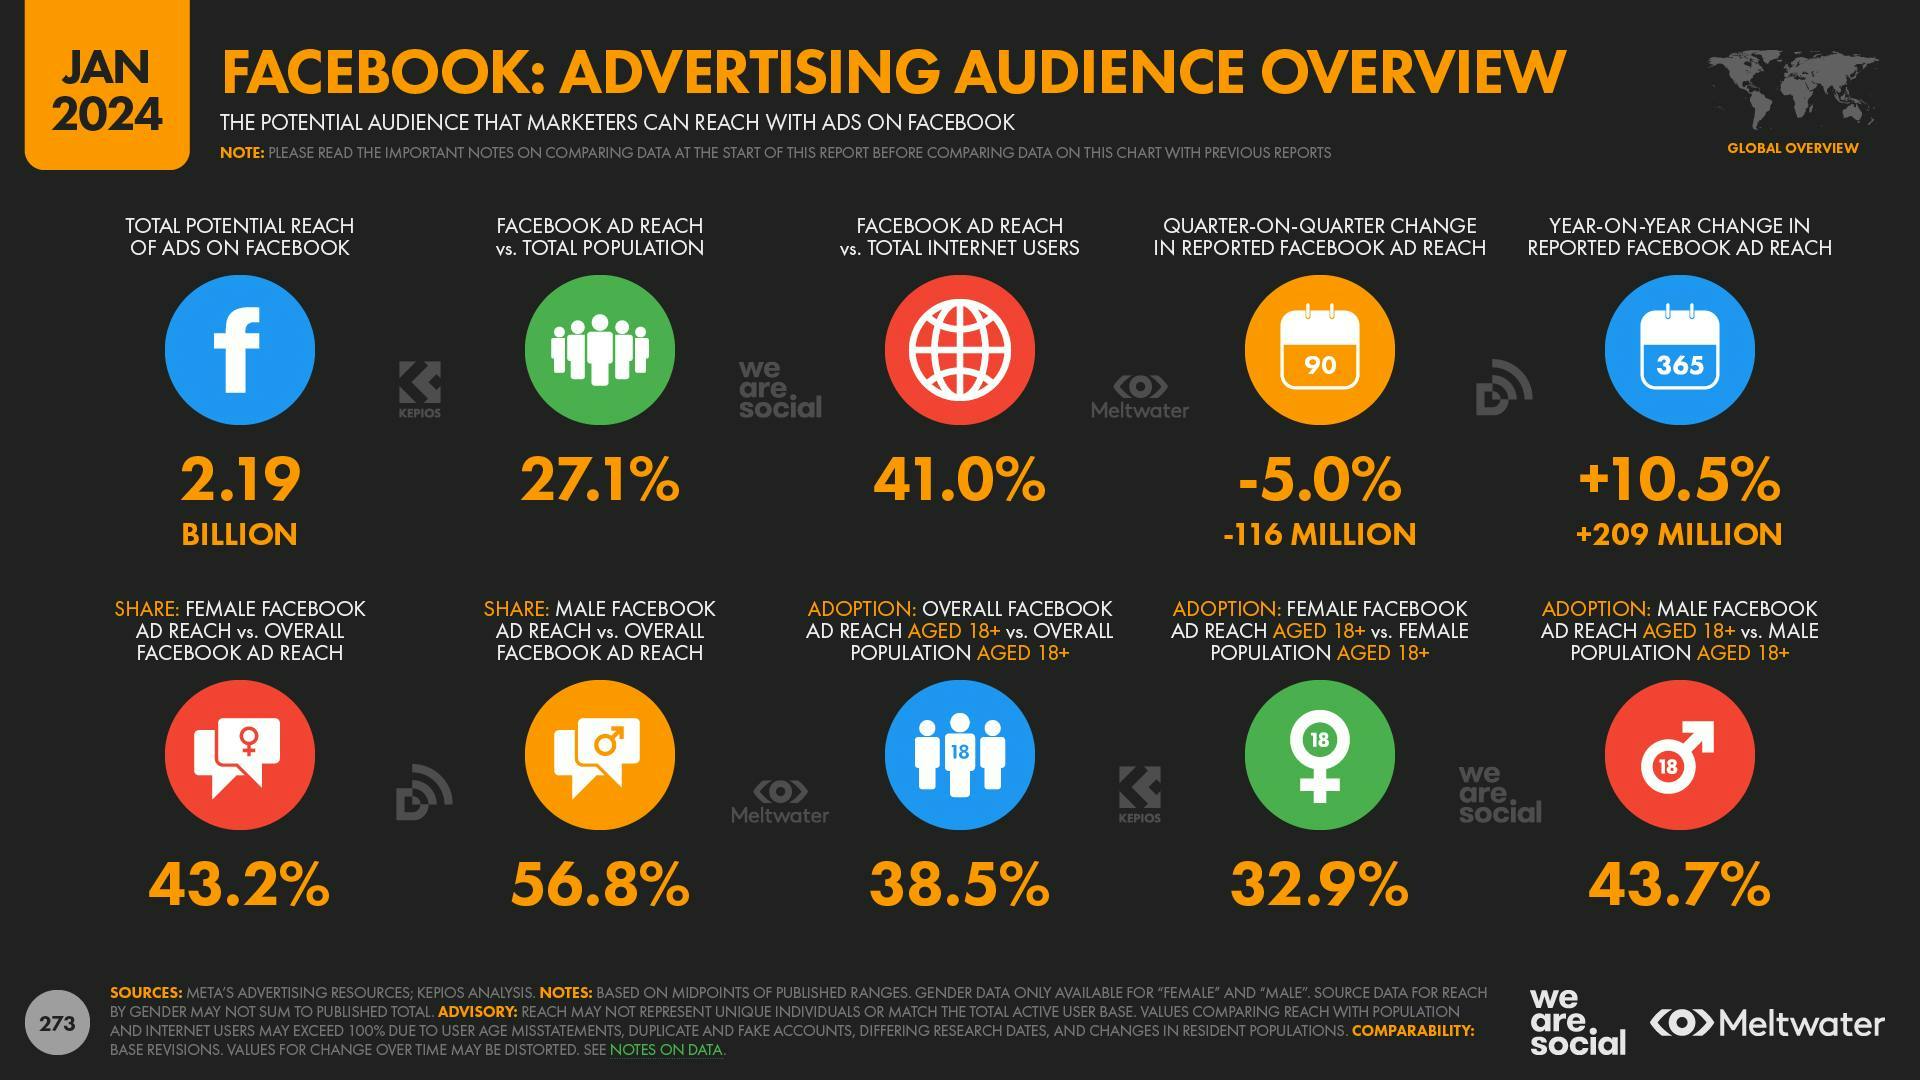 Facebook: Advertising audience overview